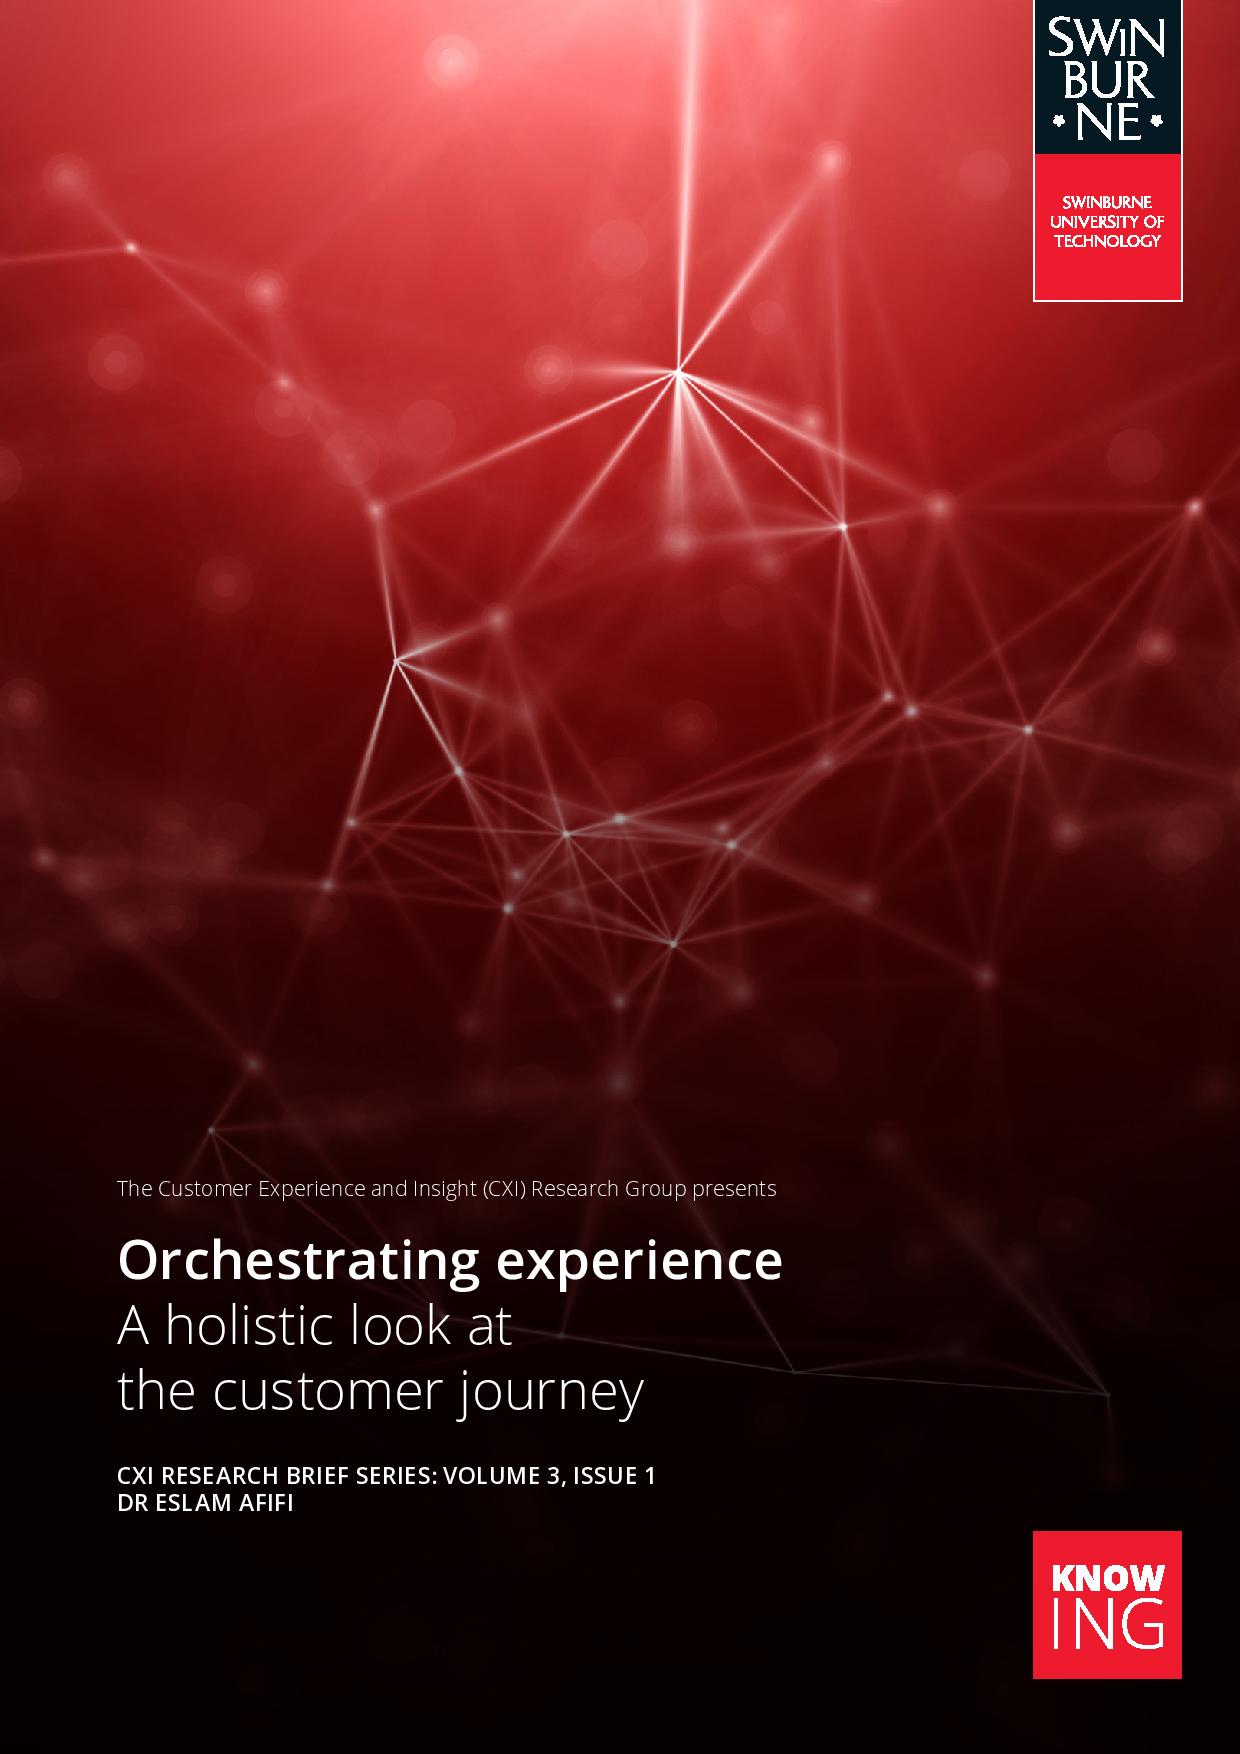 Orchestrating experience - A holistic look at the customer journey